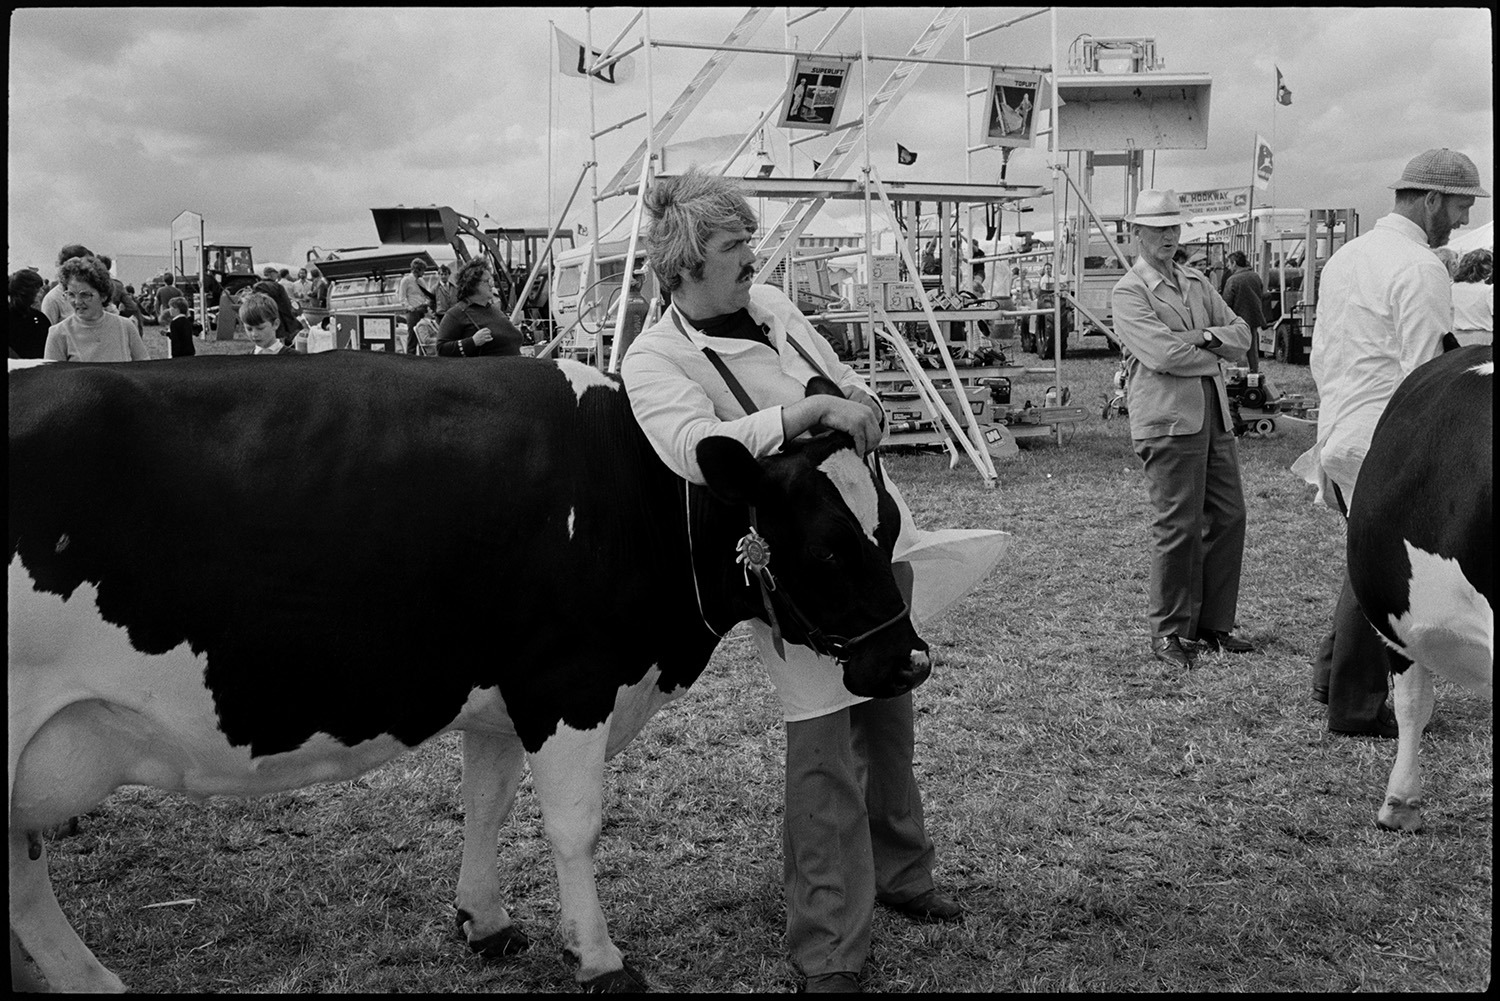 North Devon Show, Prize cattle sheep, people having teas, woman, mother and baby.
[Man with prize Friesian cow, at the North Devon Show near Alverdiscott. The cow is wearing a rosette. Machinery, including diggers and tractors, and visitors are visible in the background.]